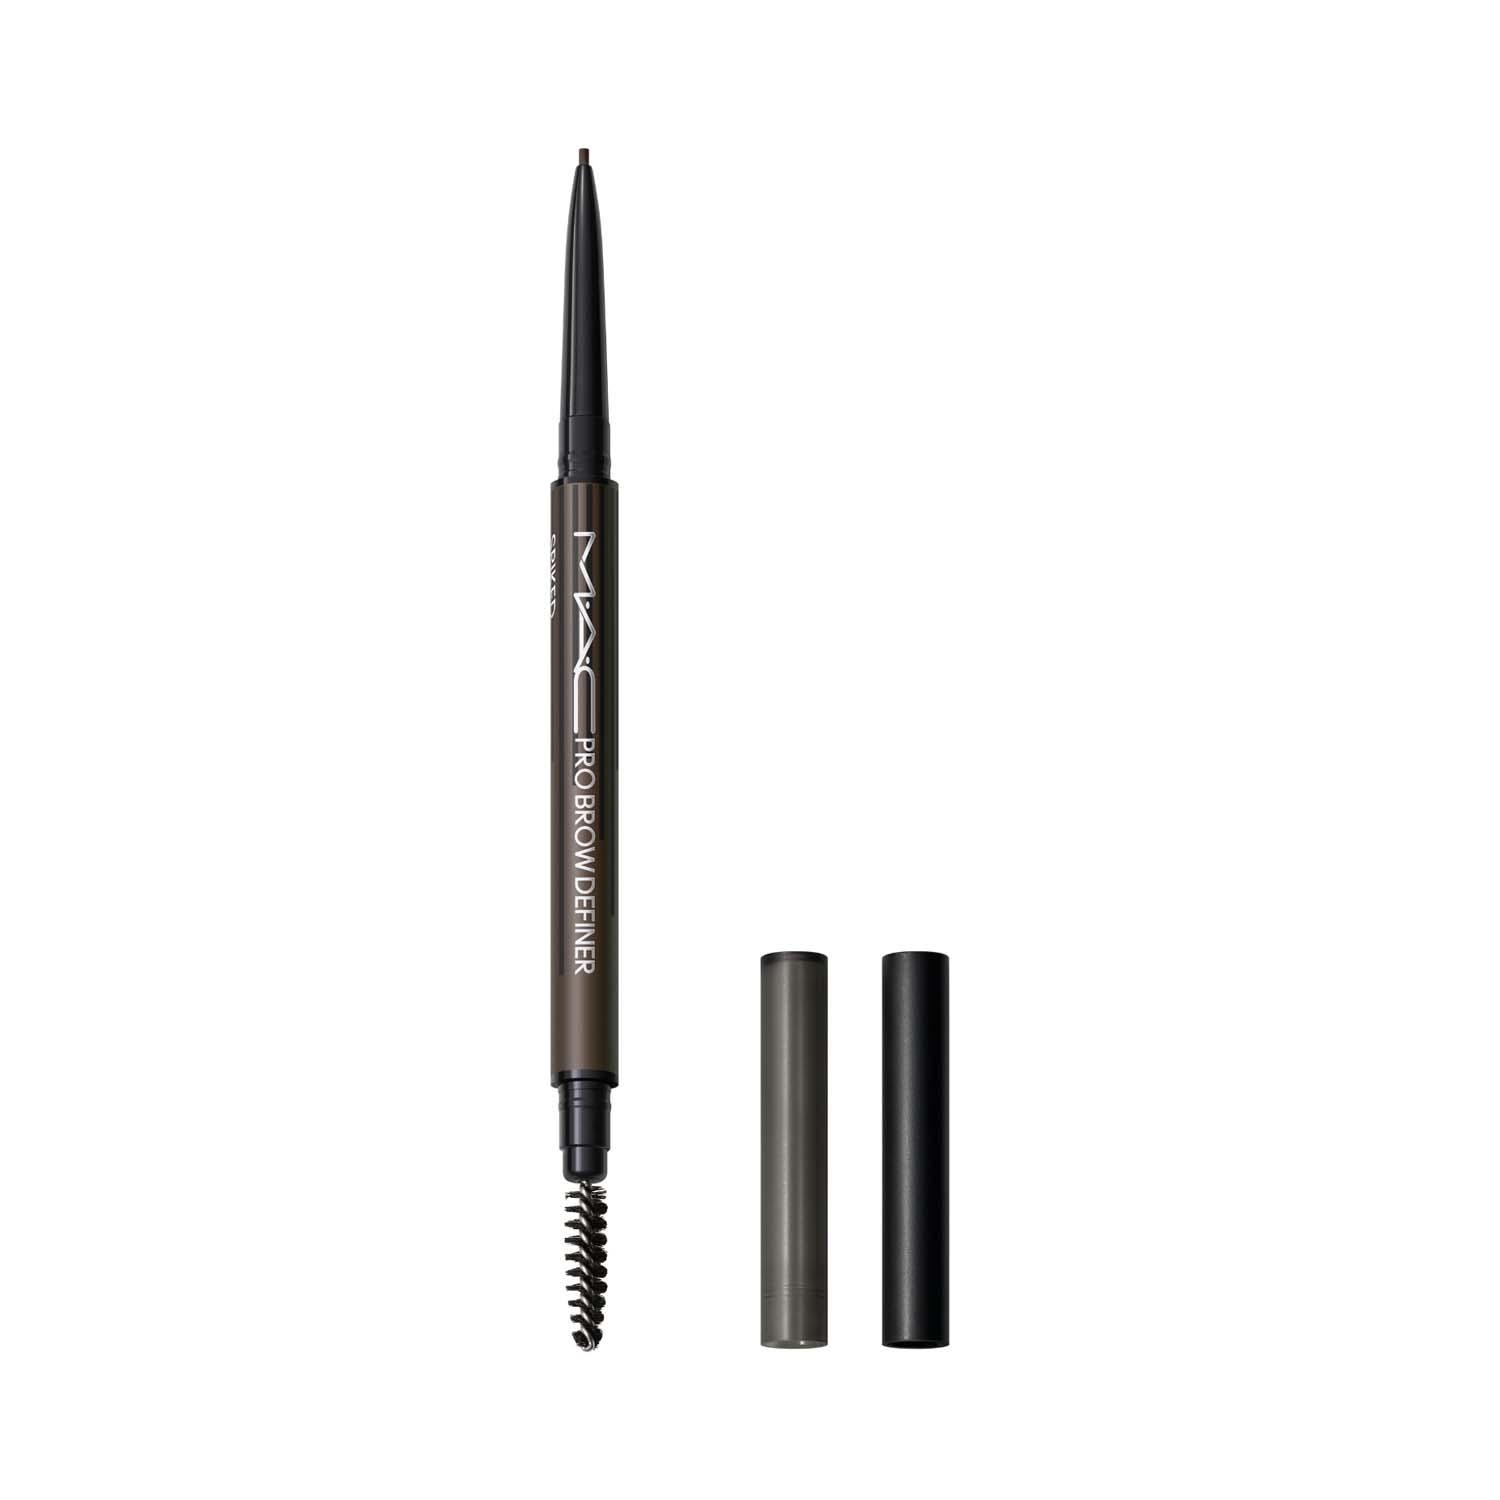 M.A.C | M.A.C Pro Brow Styler - Spiked (0.3 g)